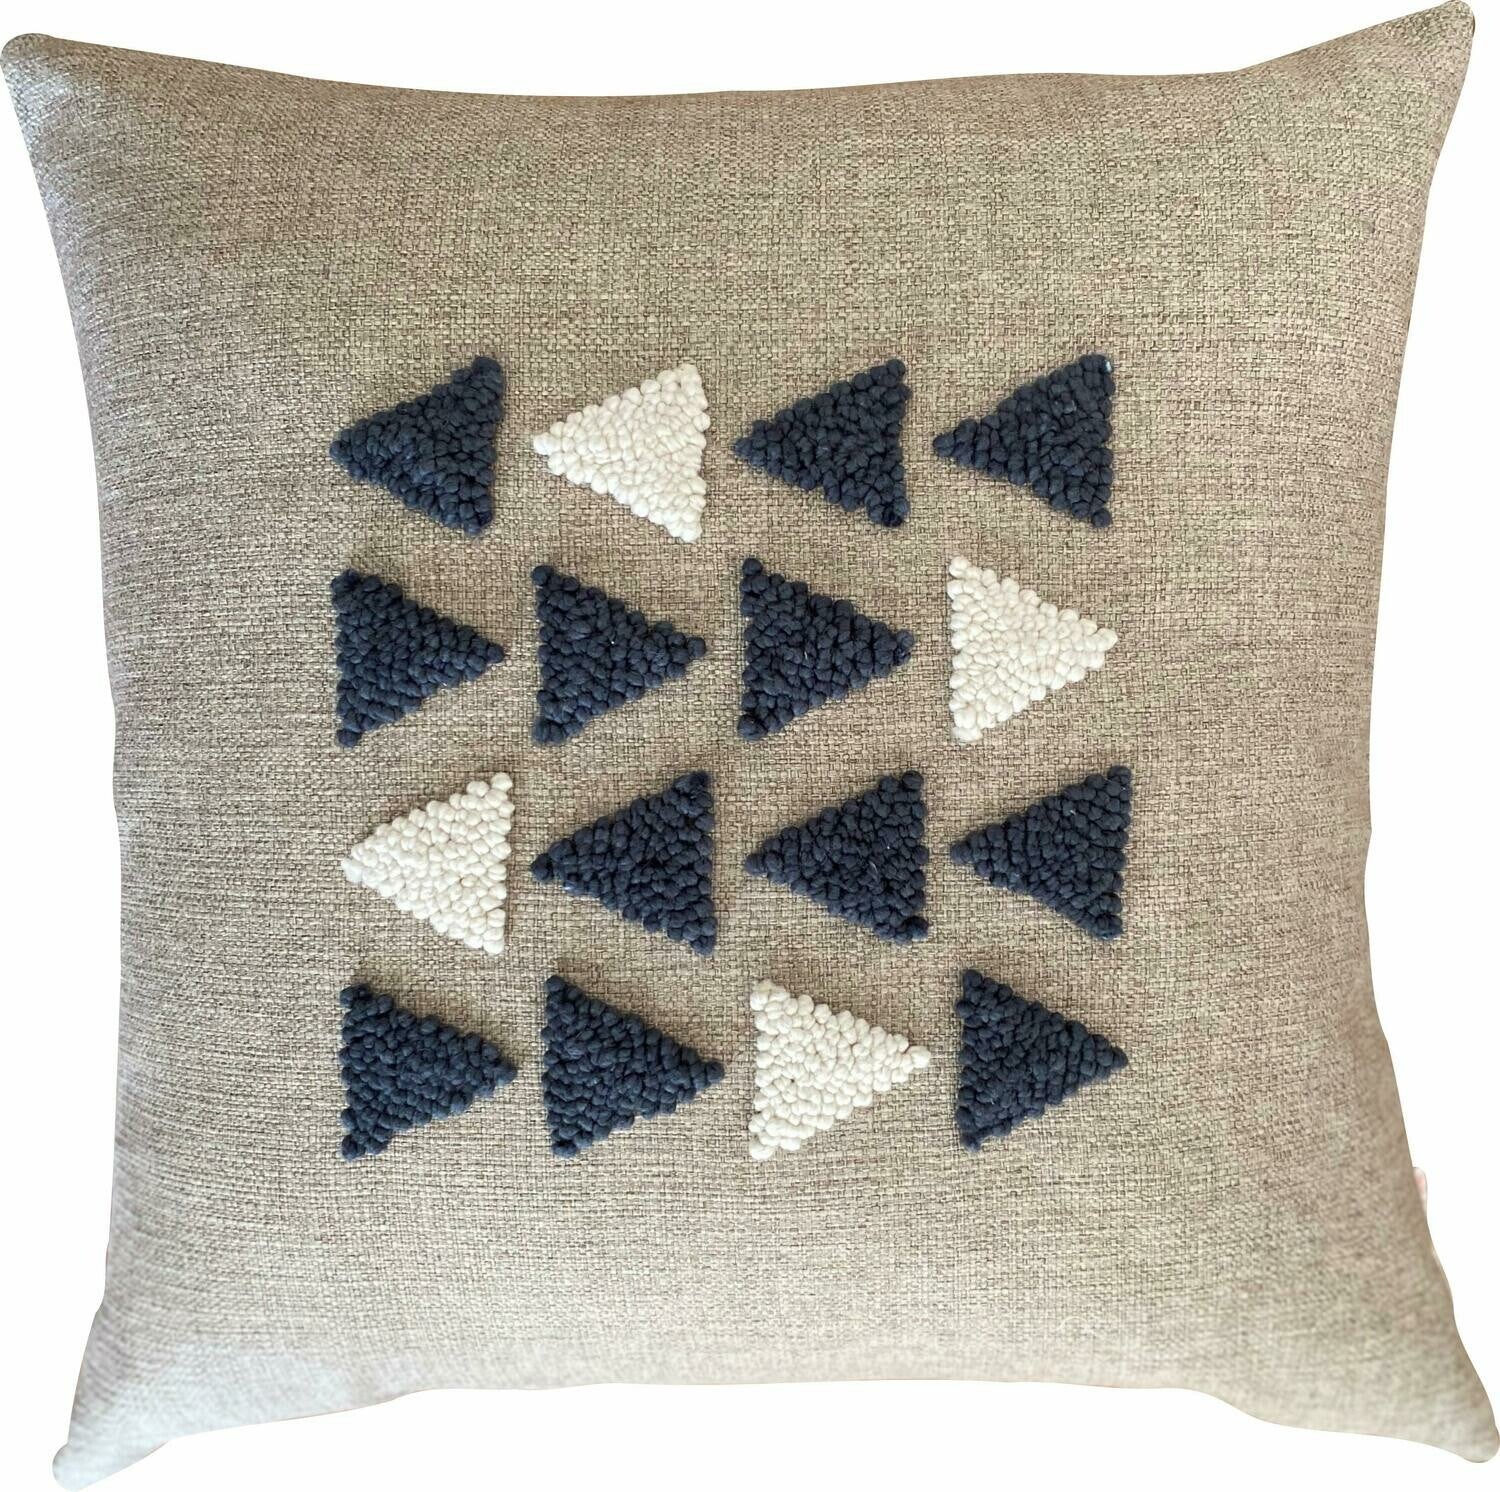 Scatter_Cushion_Punchneedle_Appilque_Scandi_African_Charcoal_natural_Linen